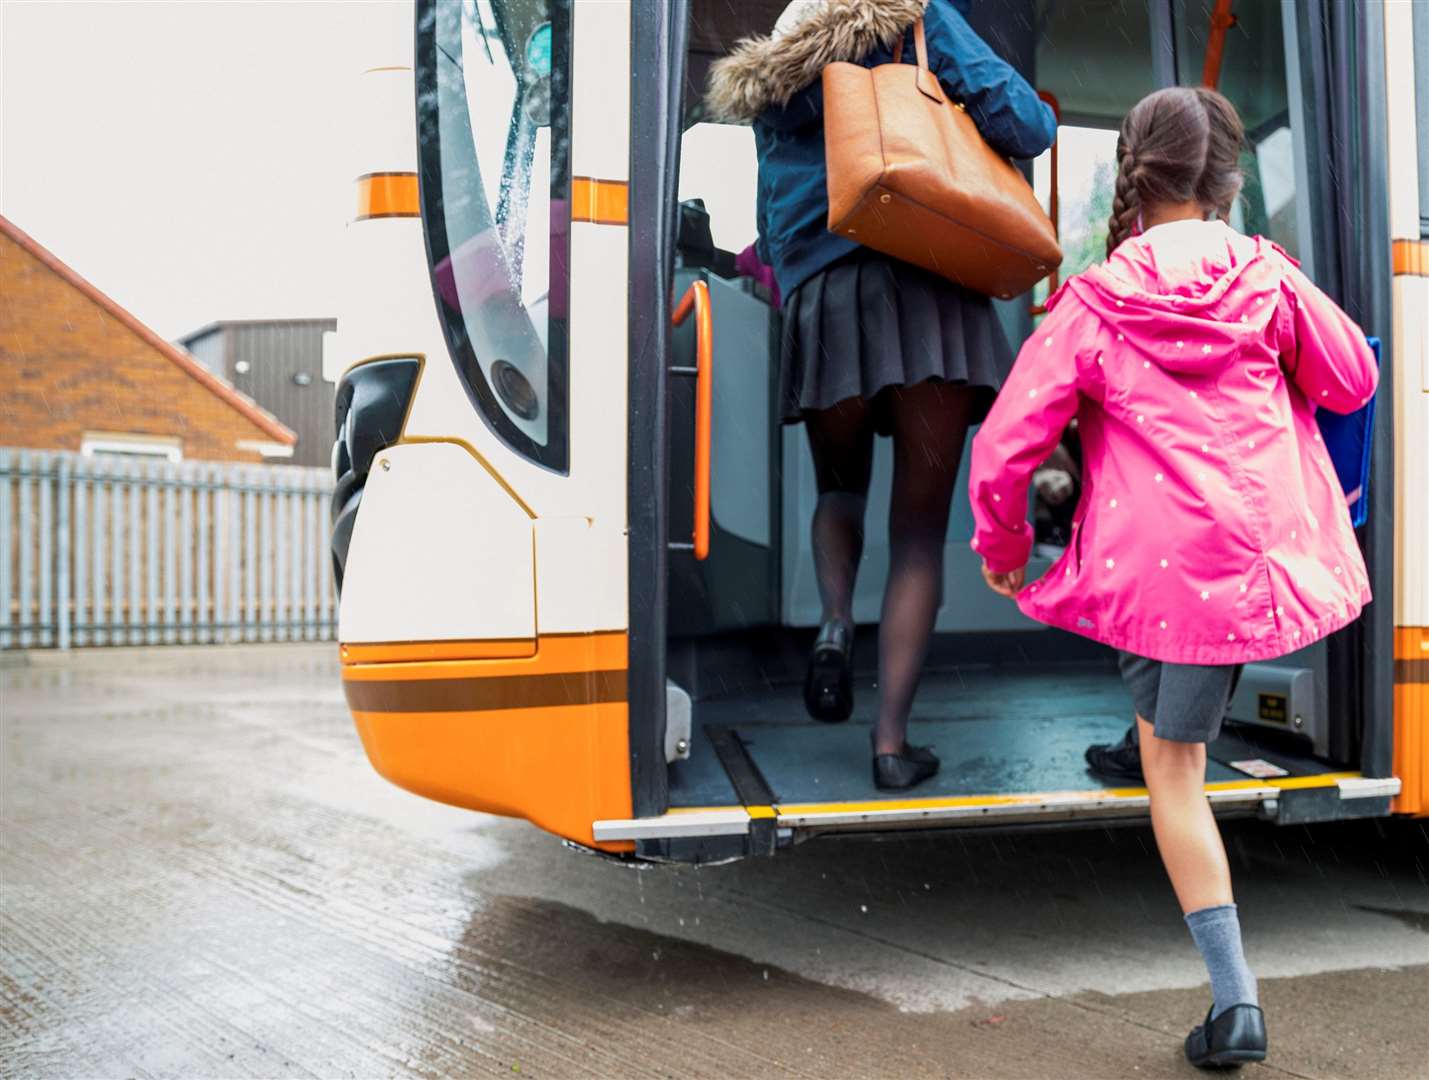 Jackie says children could have to wait two hours for a bus